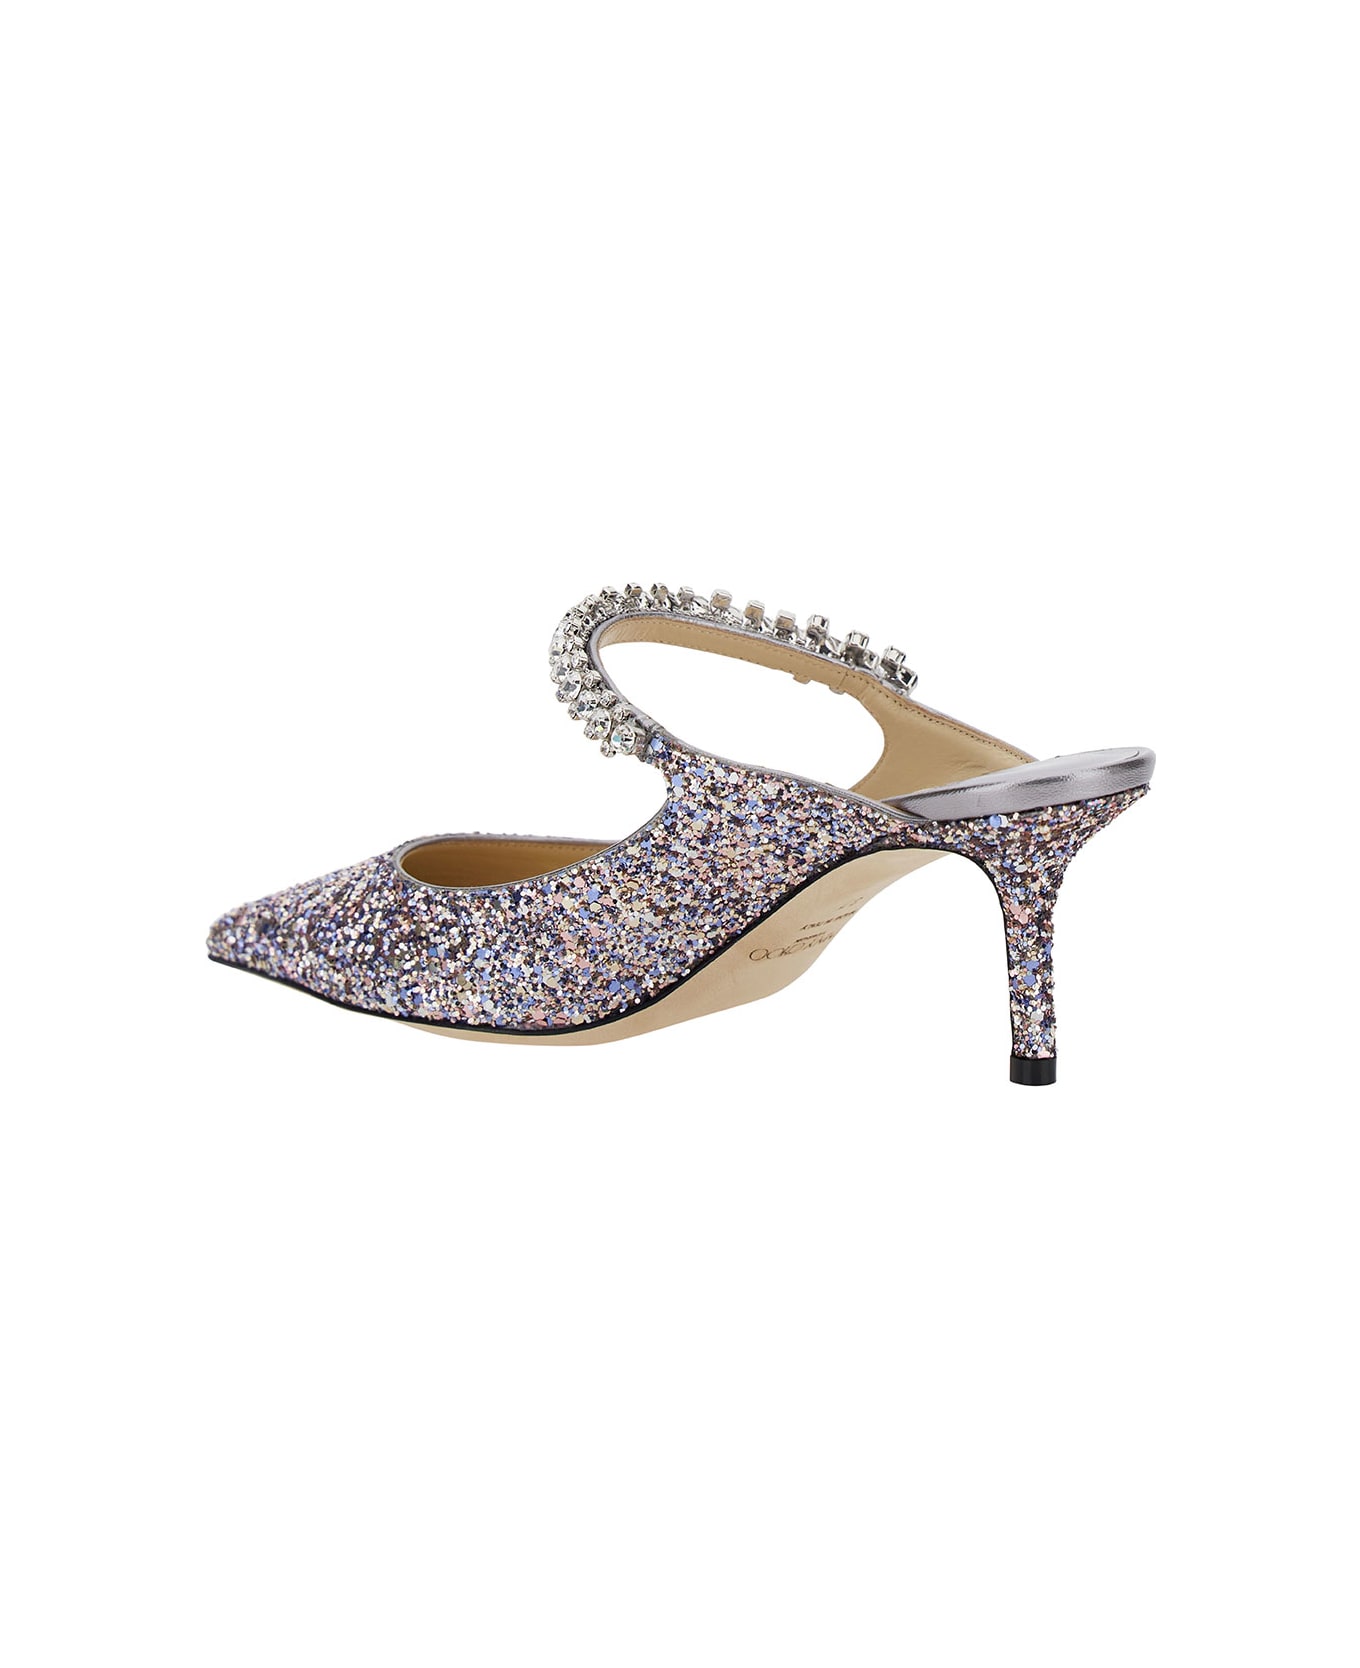 Jimmy Choo 'bing 65' Multicolor Sabot With Crystal Strap In Leather Woman - Metallic サンダル